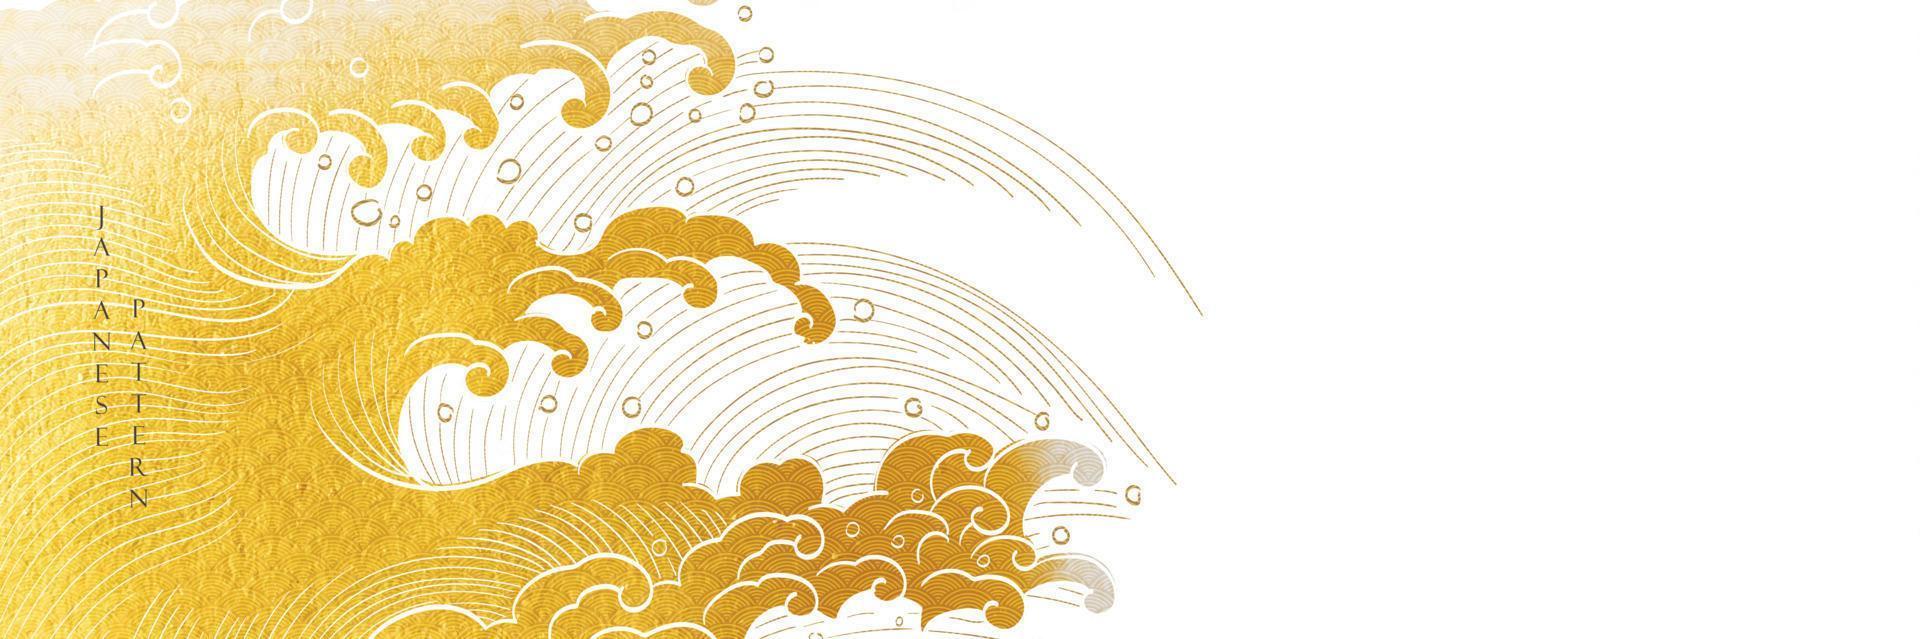 Japanese background with hand drawn wave line vector. Gold texture in vintage style. Presentation template design, poster, cd cover, flyer, website backgrounds, banner or advertising. vector